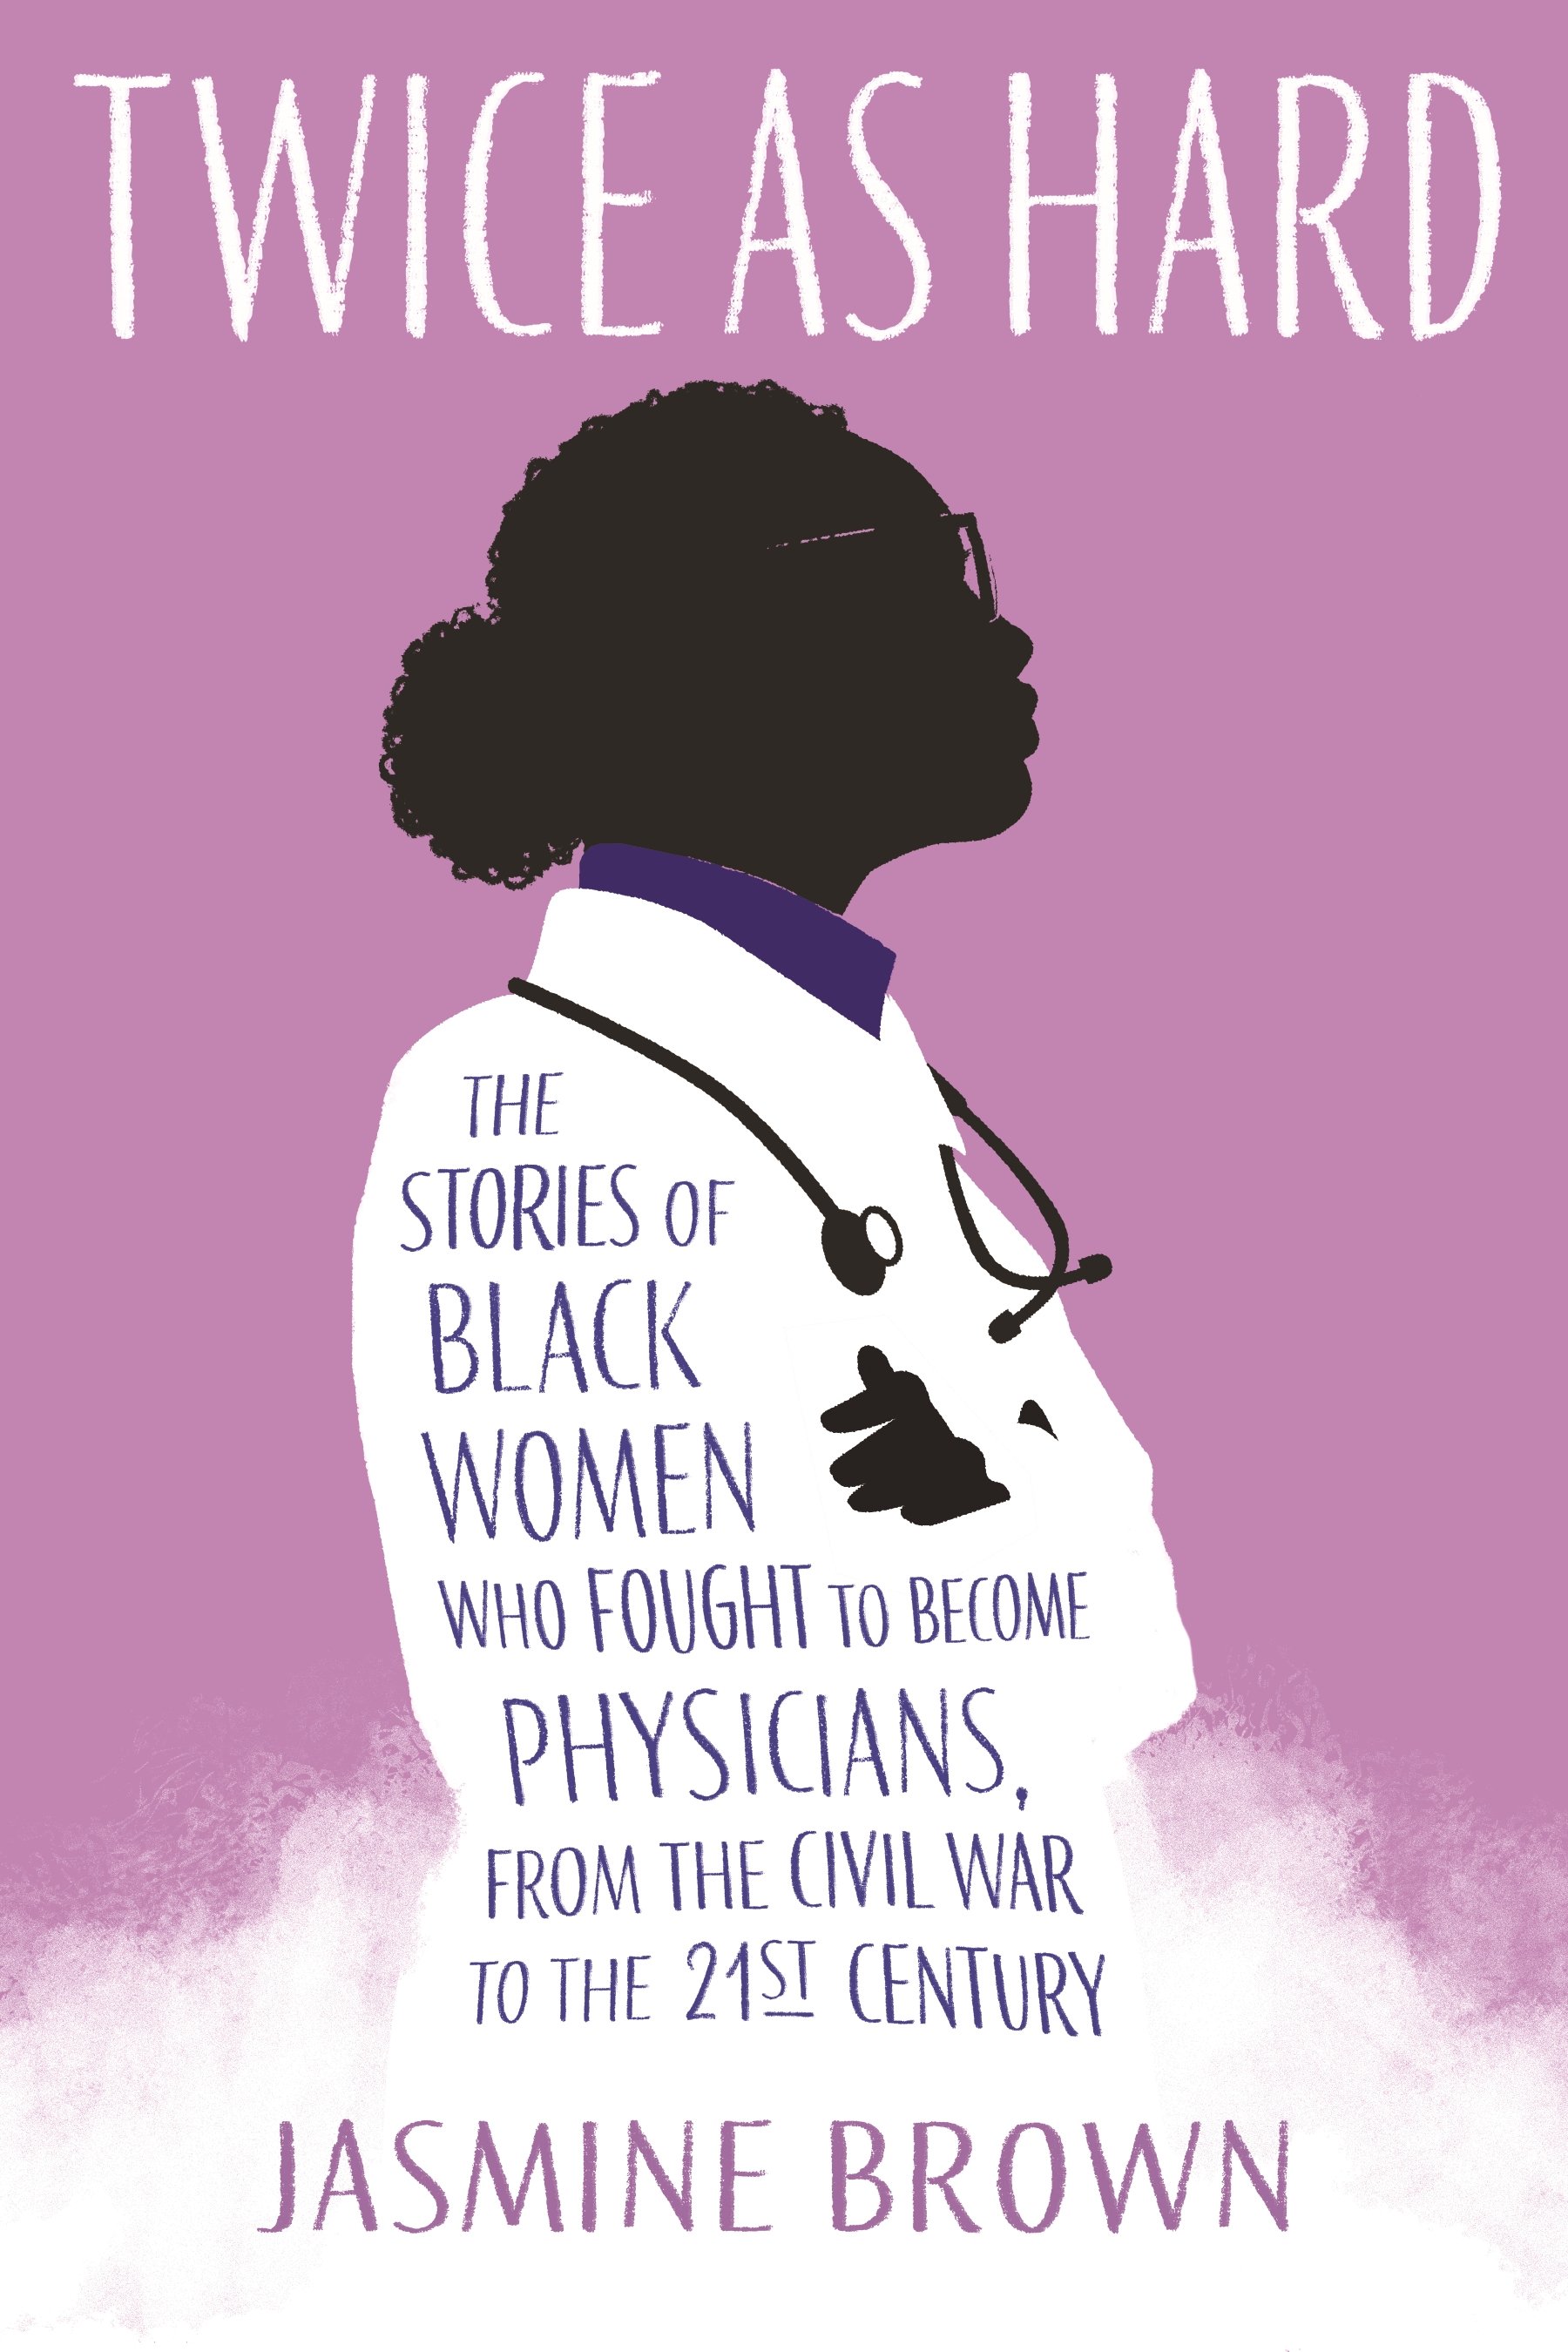 Twice as Hard THE STORIES OF BLACK WOMEN WHO FOUGHT TO BECOME PHYSICIANS, FROM THE CIVIL WAR TO THE 21ST CENTURY By Jasmine Brown